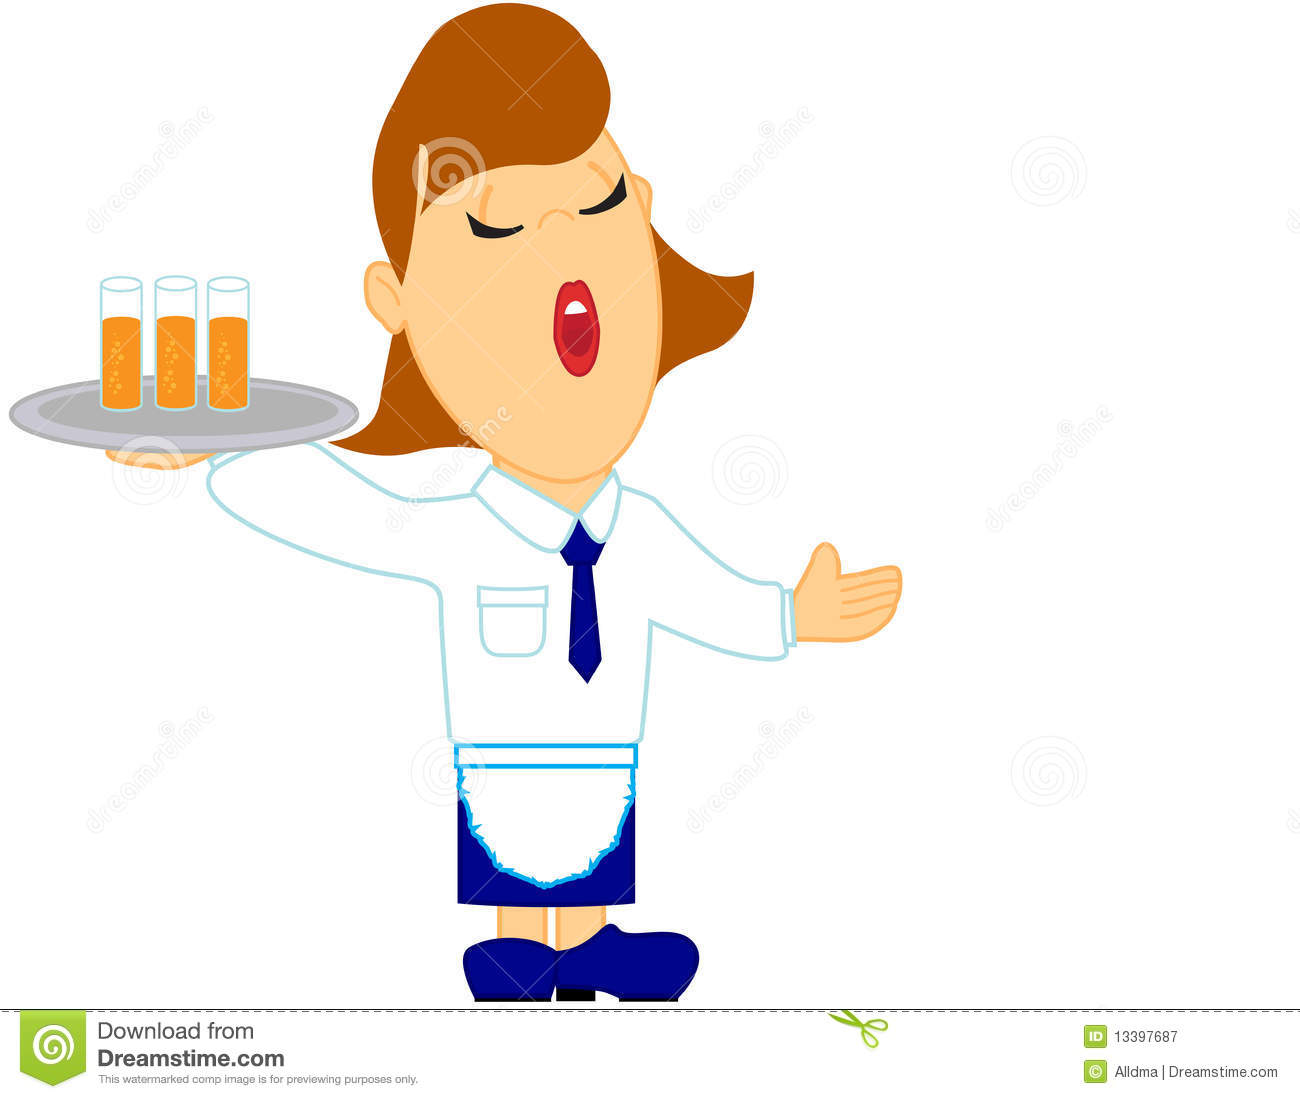 Cartoon Illustration Of Waitress With Tray Of Drinks Isolated On